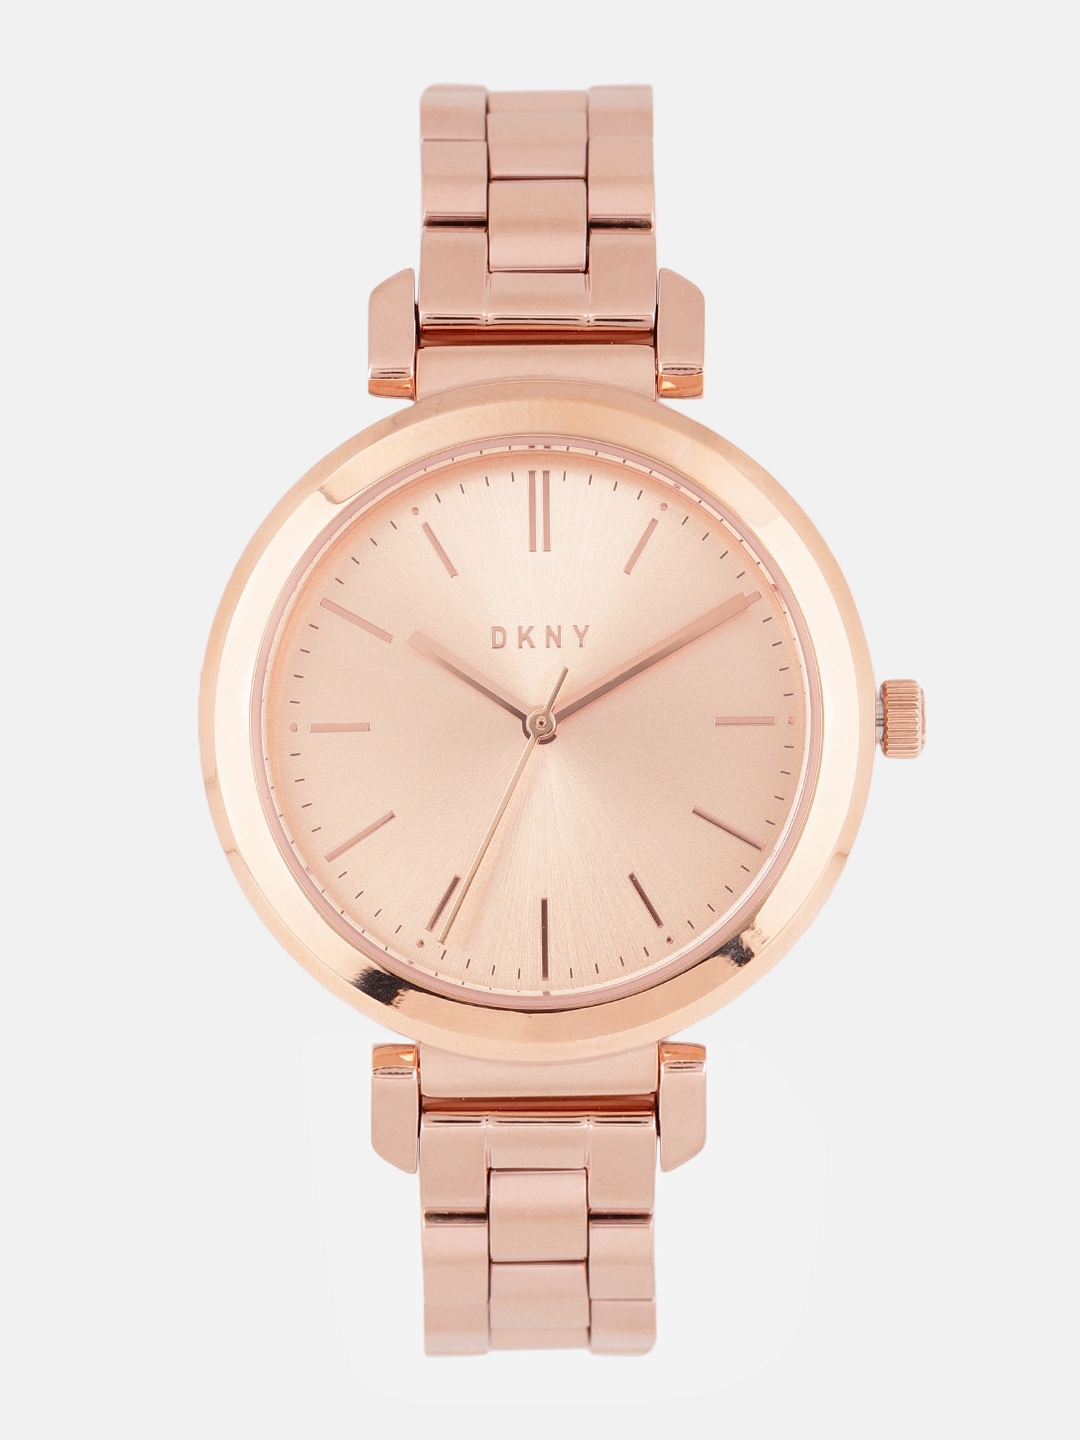 Up to 52% Off Women's DKNY Watches | Groupon-happymobile.vn